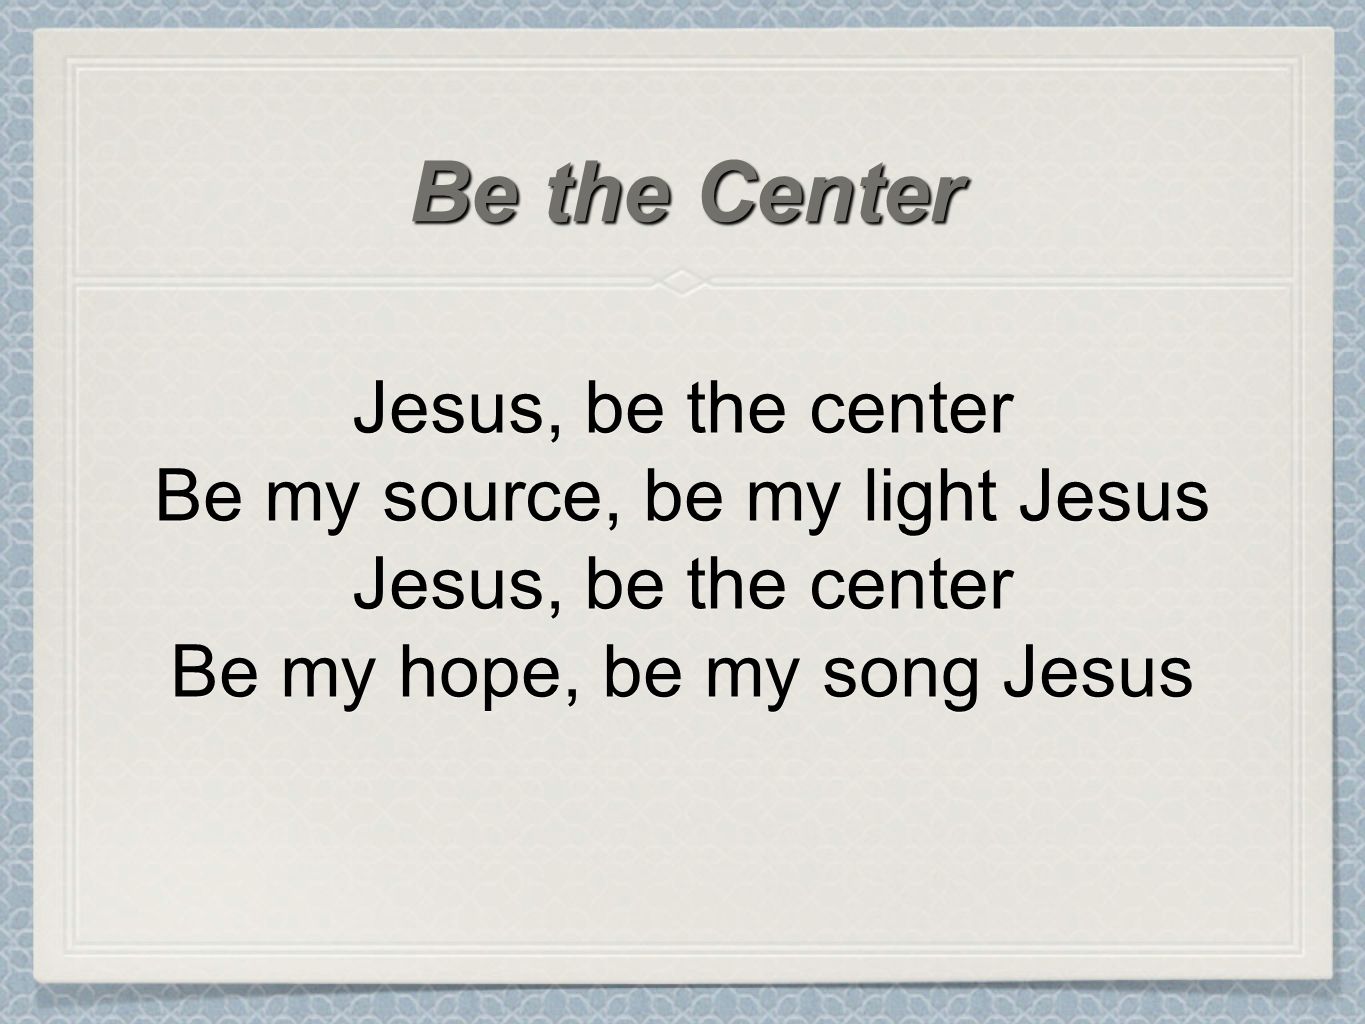 Jesus, be the center Be my source, be my light Jesus Jesus, be the center Be my hope, be my song Jesus Be the Center